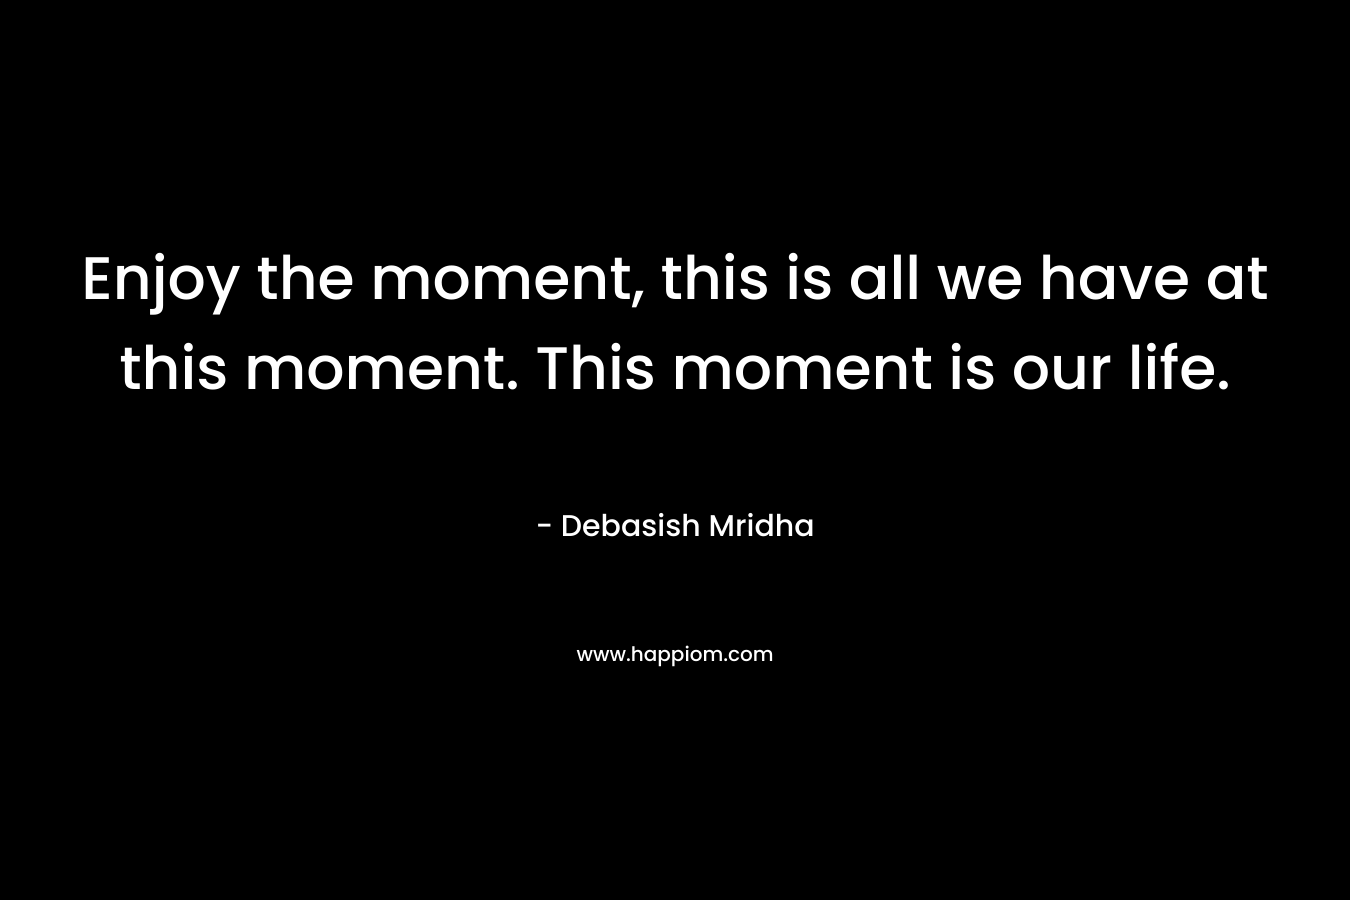 Enjoy the moment, this is all we have at this moment. This moment is our life.